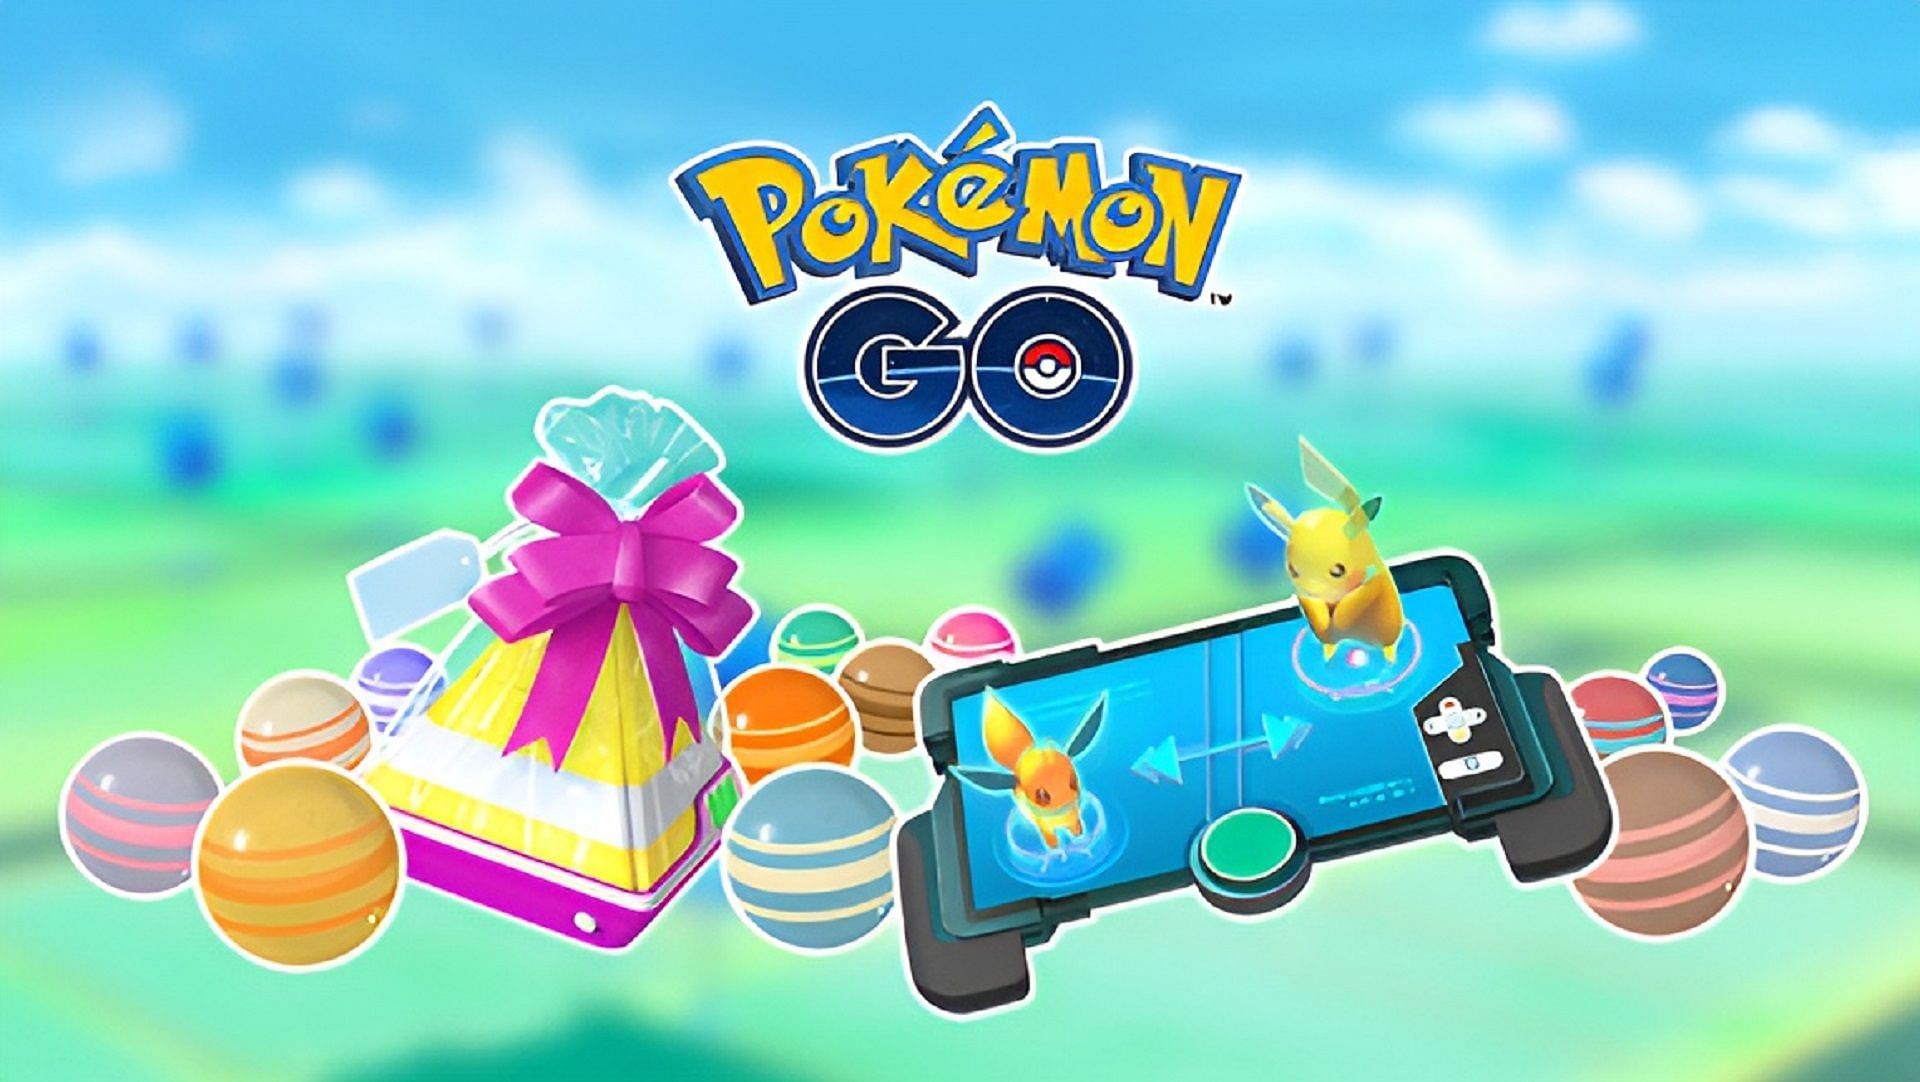 Gaining friendship levels should be much easier during this Pokemon GO event (Image via Niantic)